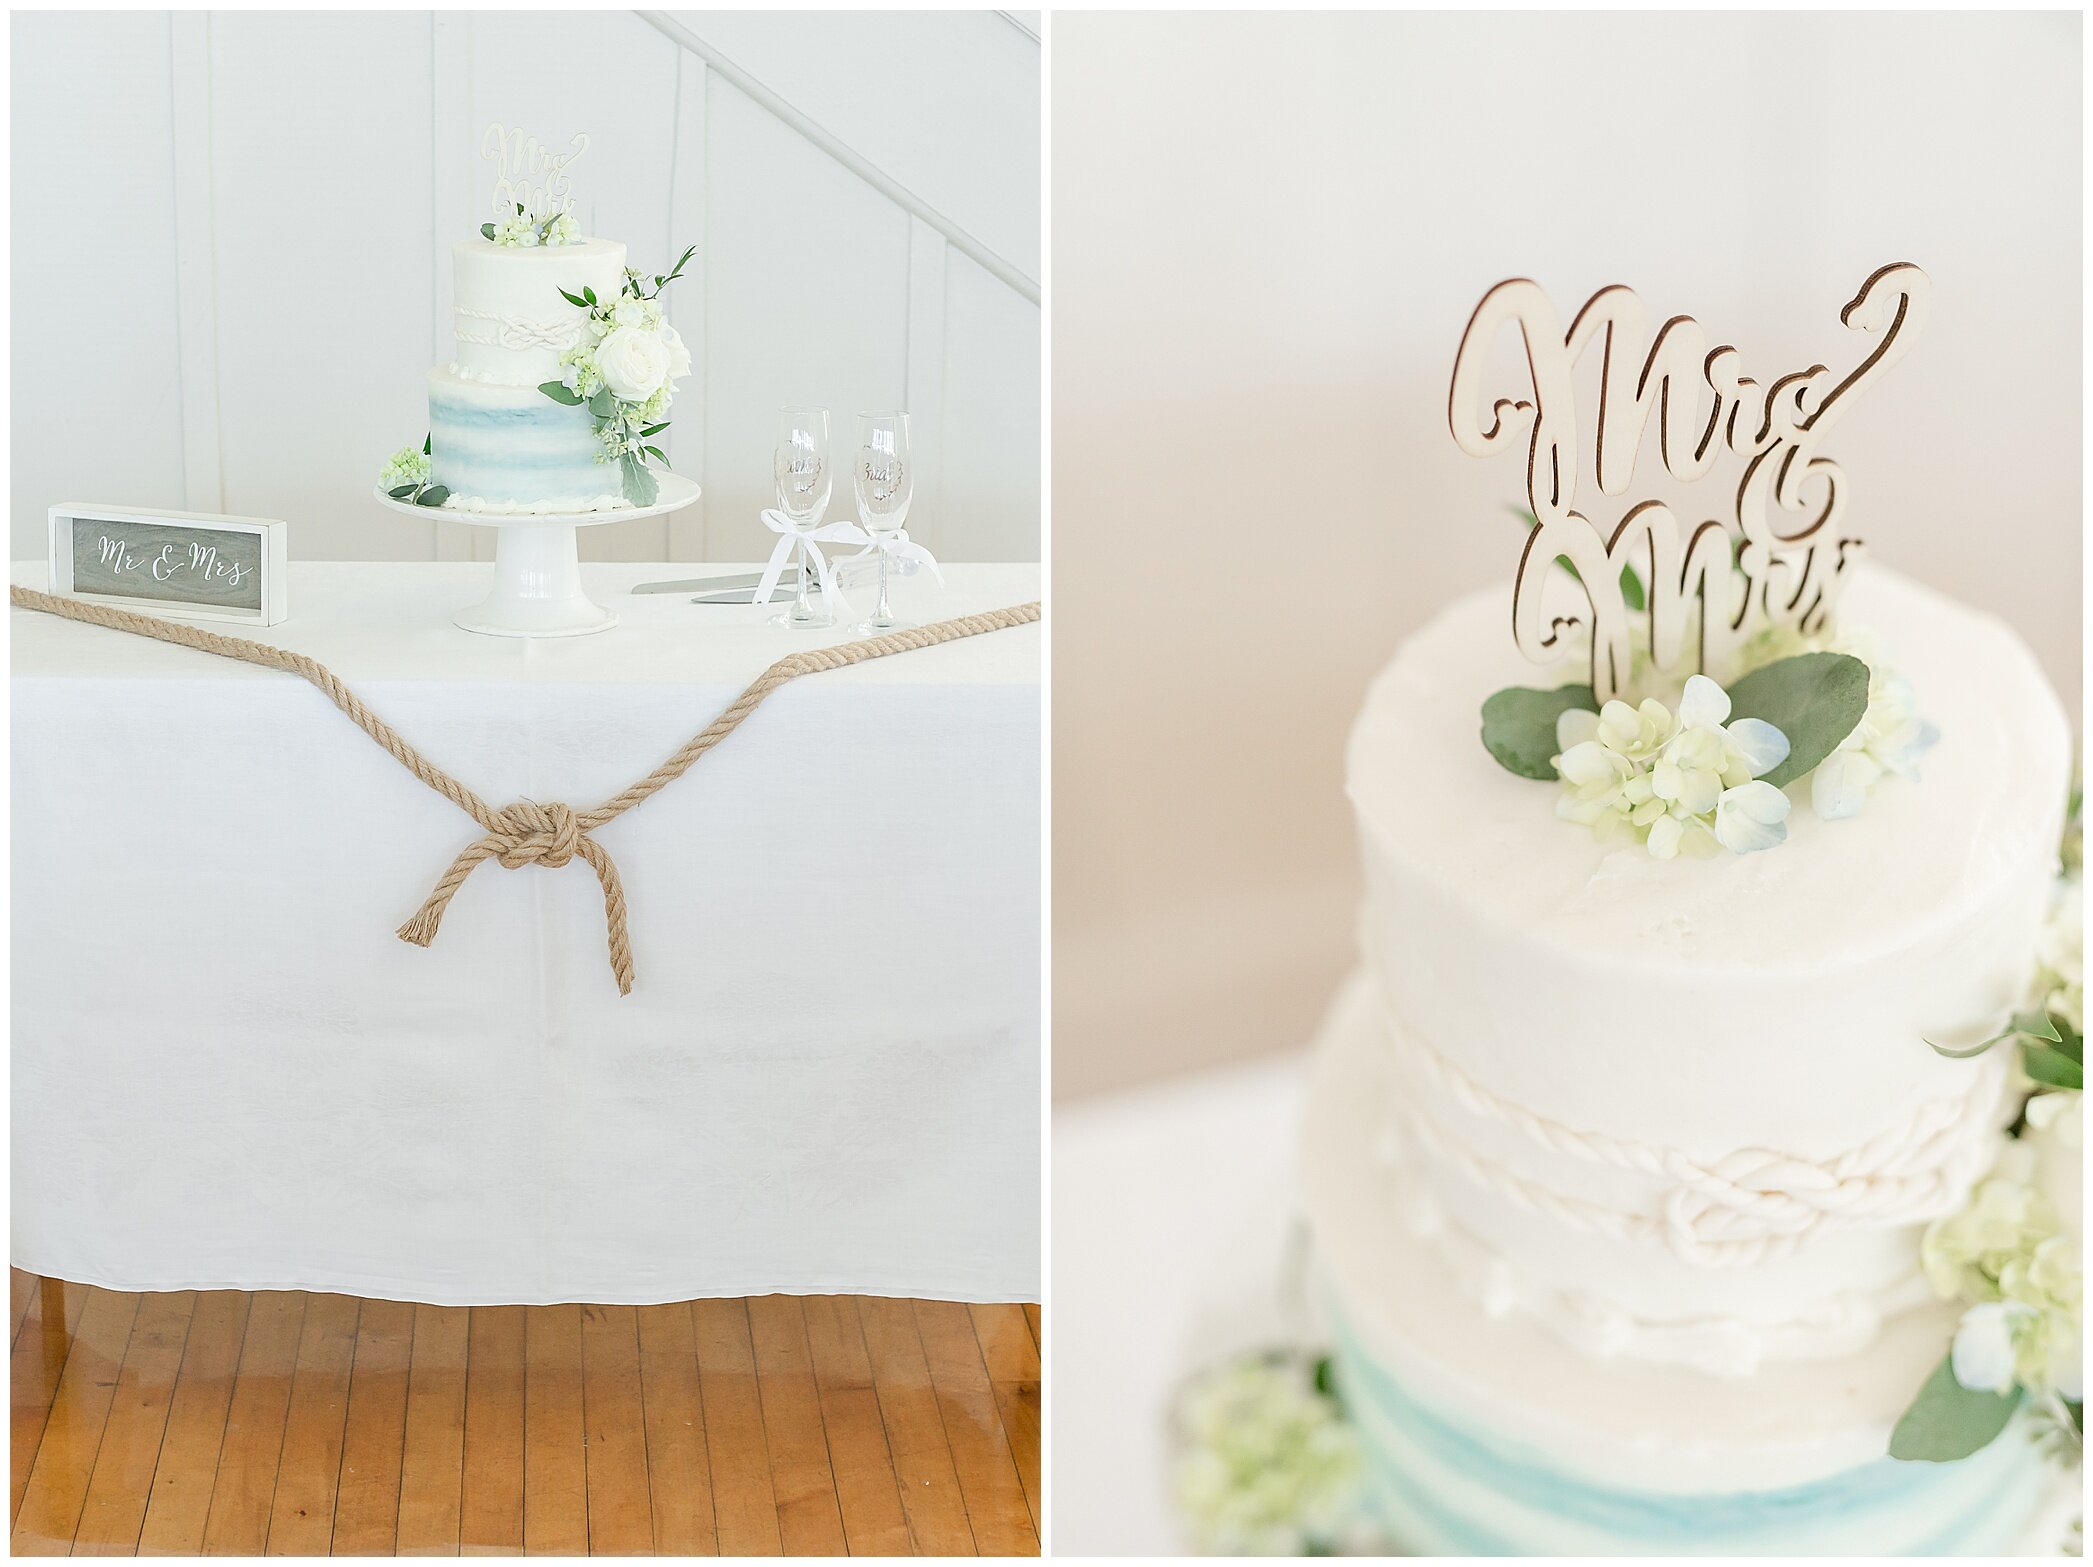 wedding cake with rope details at Planter's Club